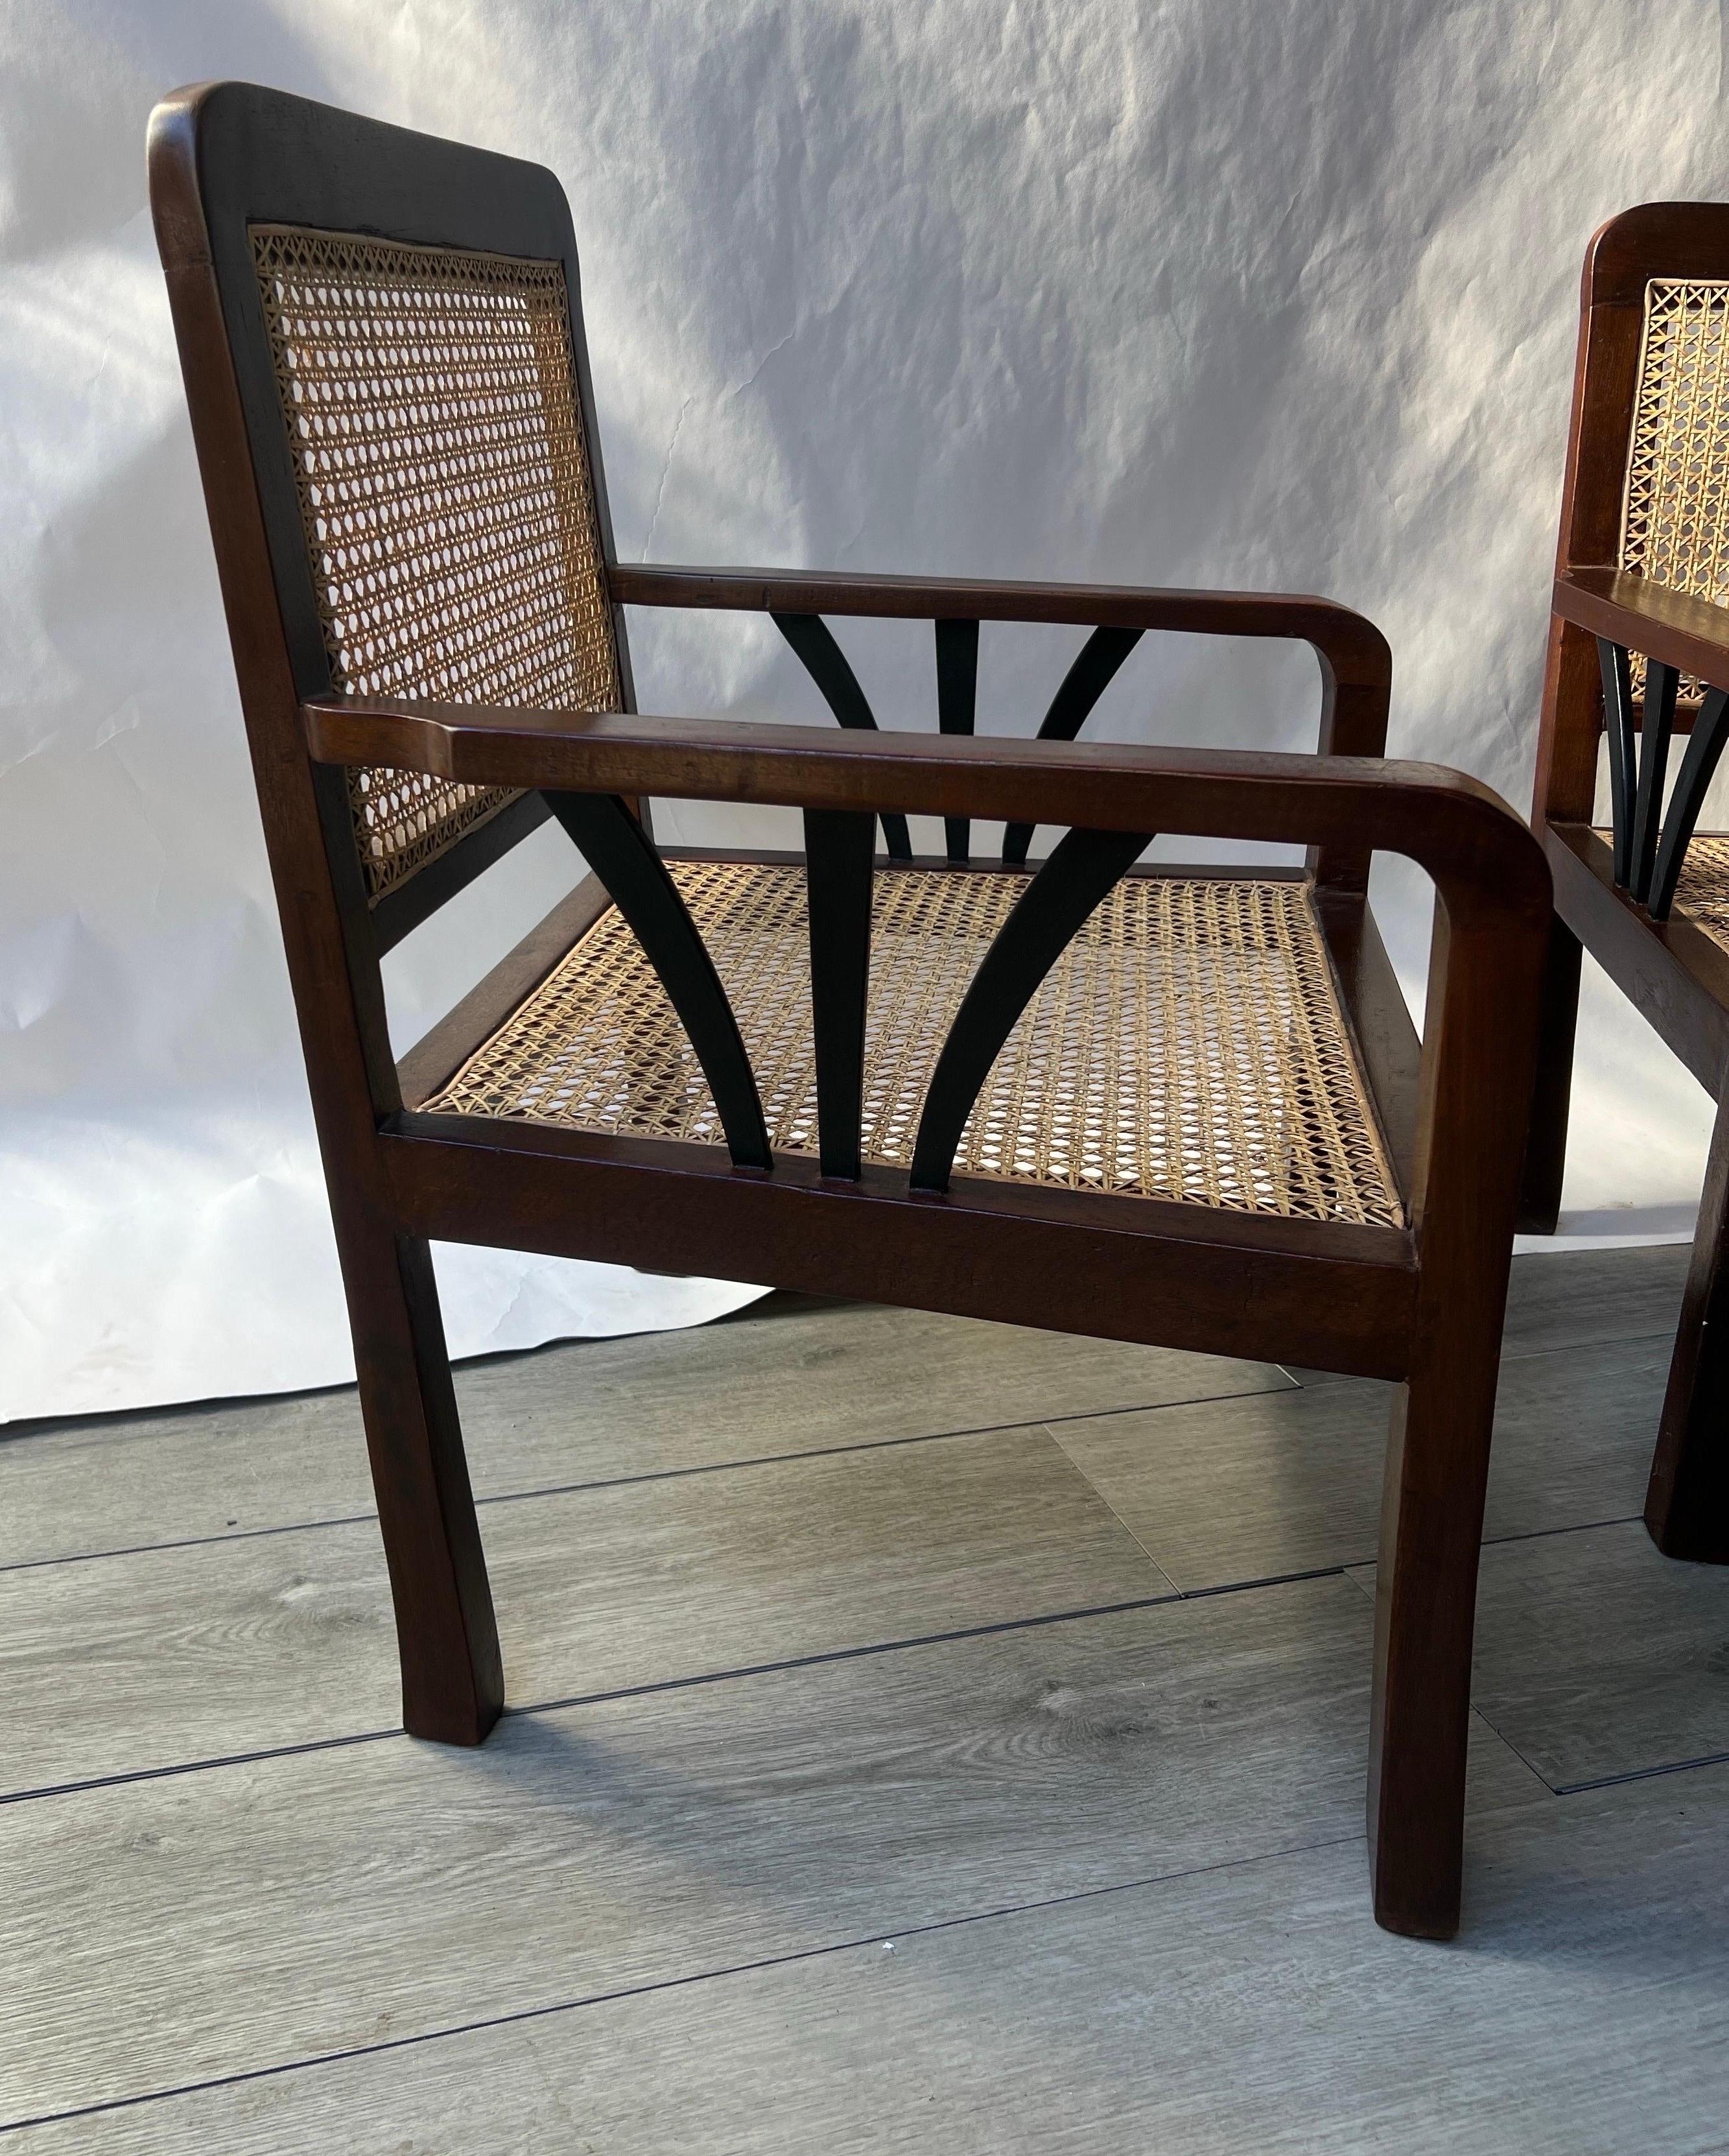 Great pair of Deco period British colonial hand caned teak wood club chairs. Recently restored and recaned. Ready for cushions or can be used as is. Matching settee also available. 